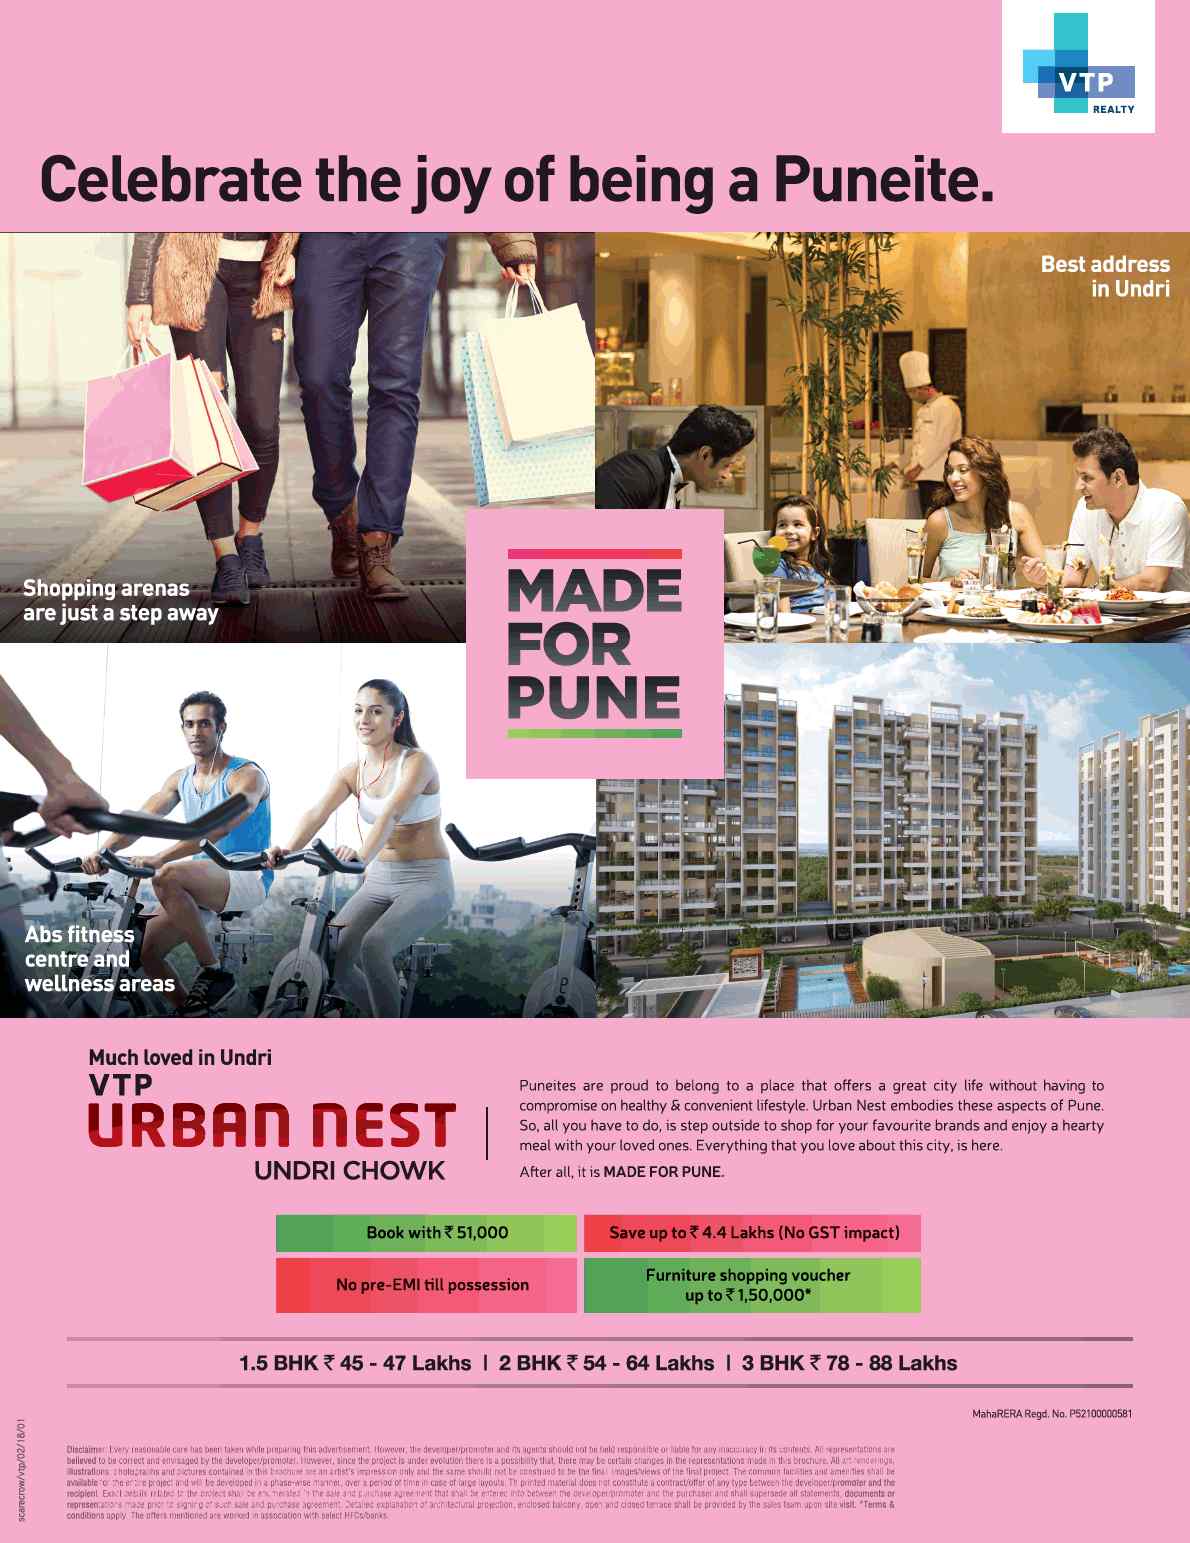 Celebrate the joy of being a Puneite by residing at VTP Urban Nest, Pune Update